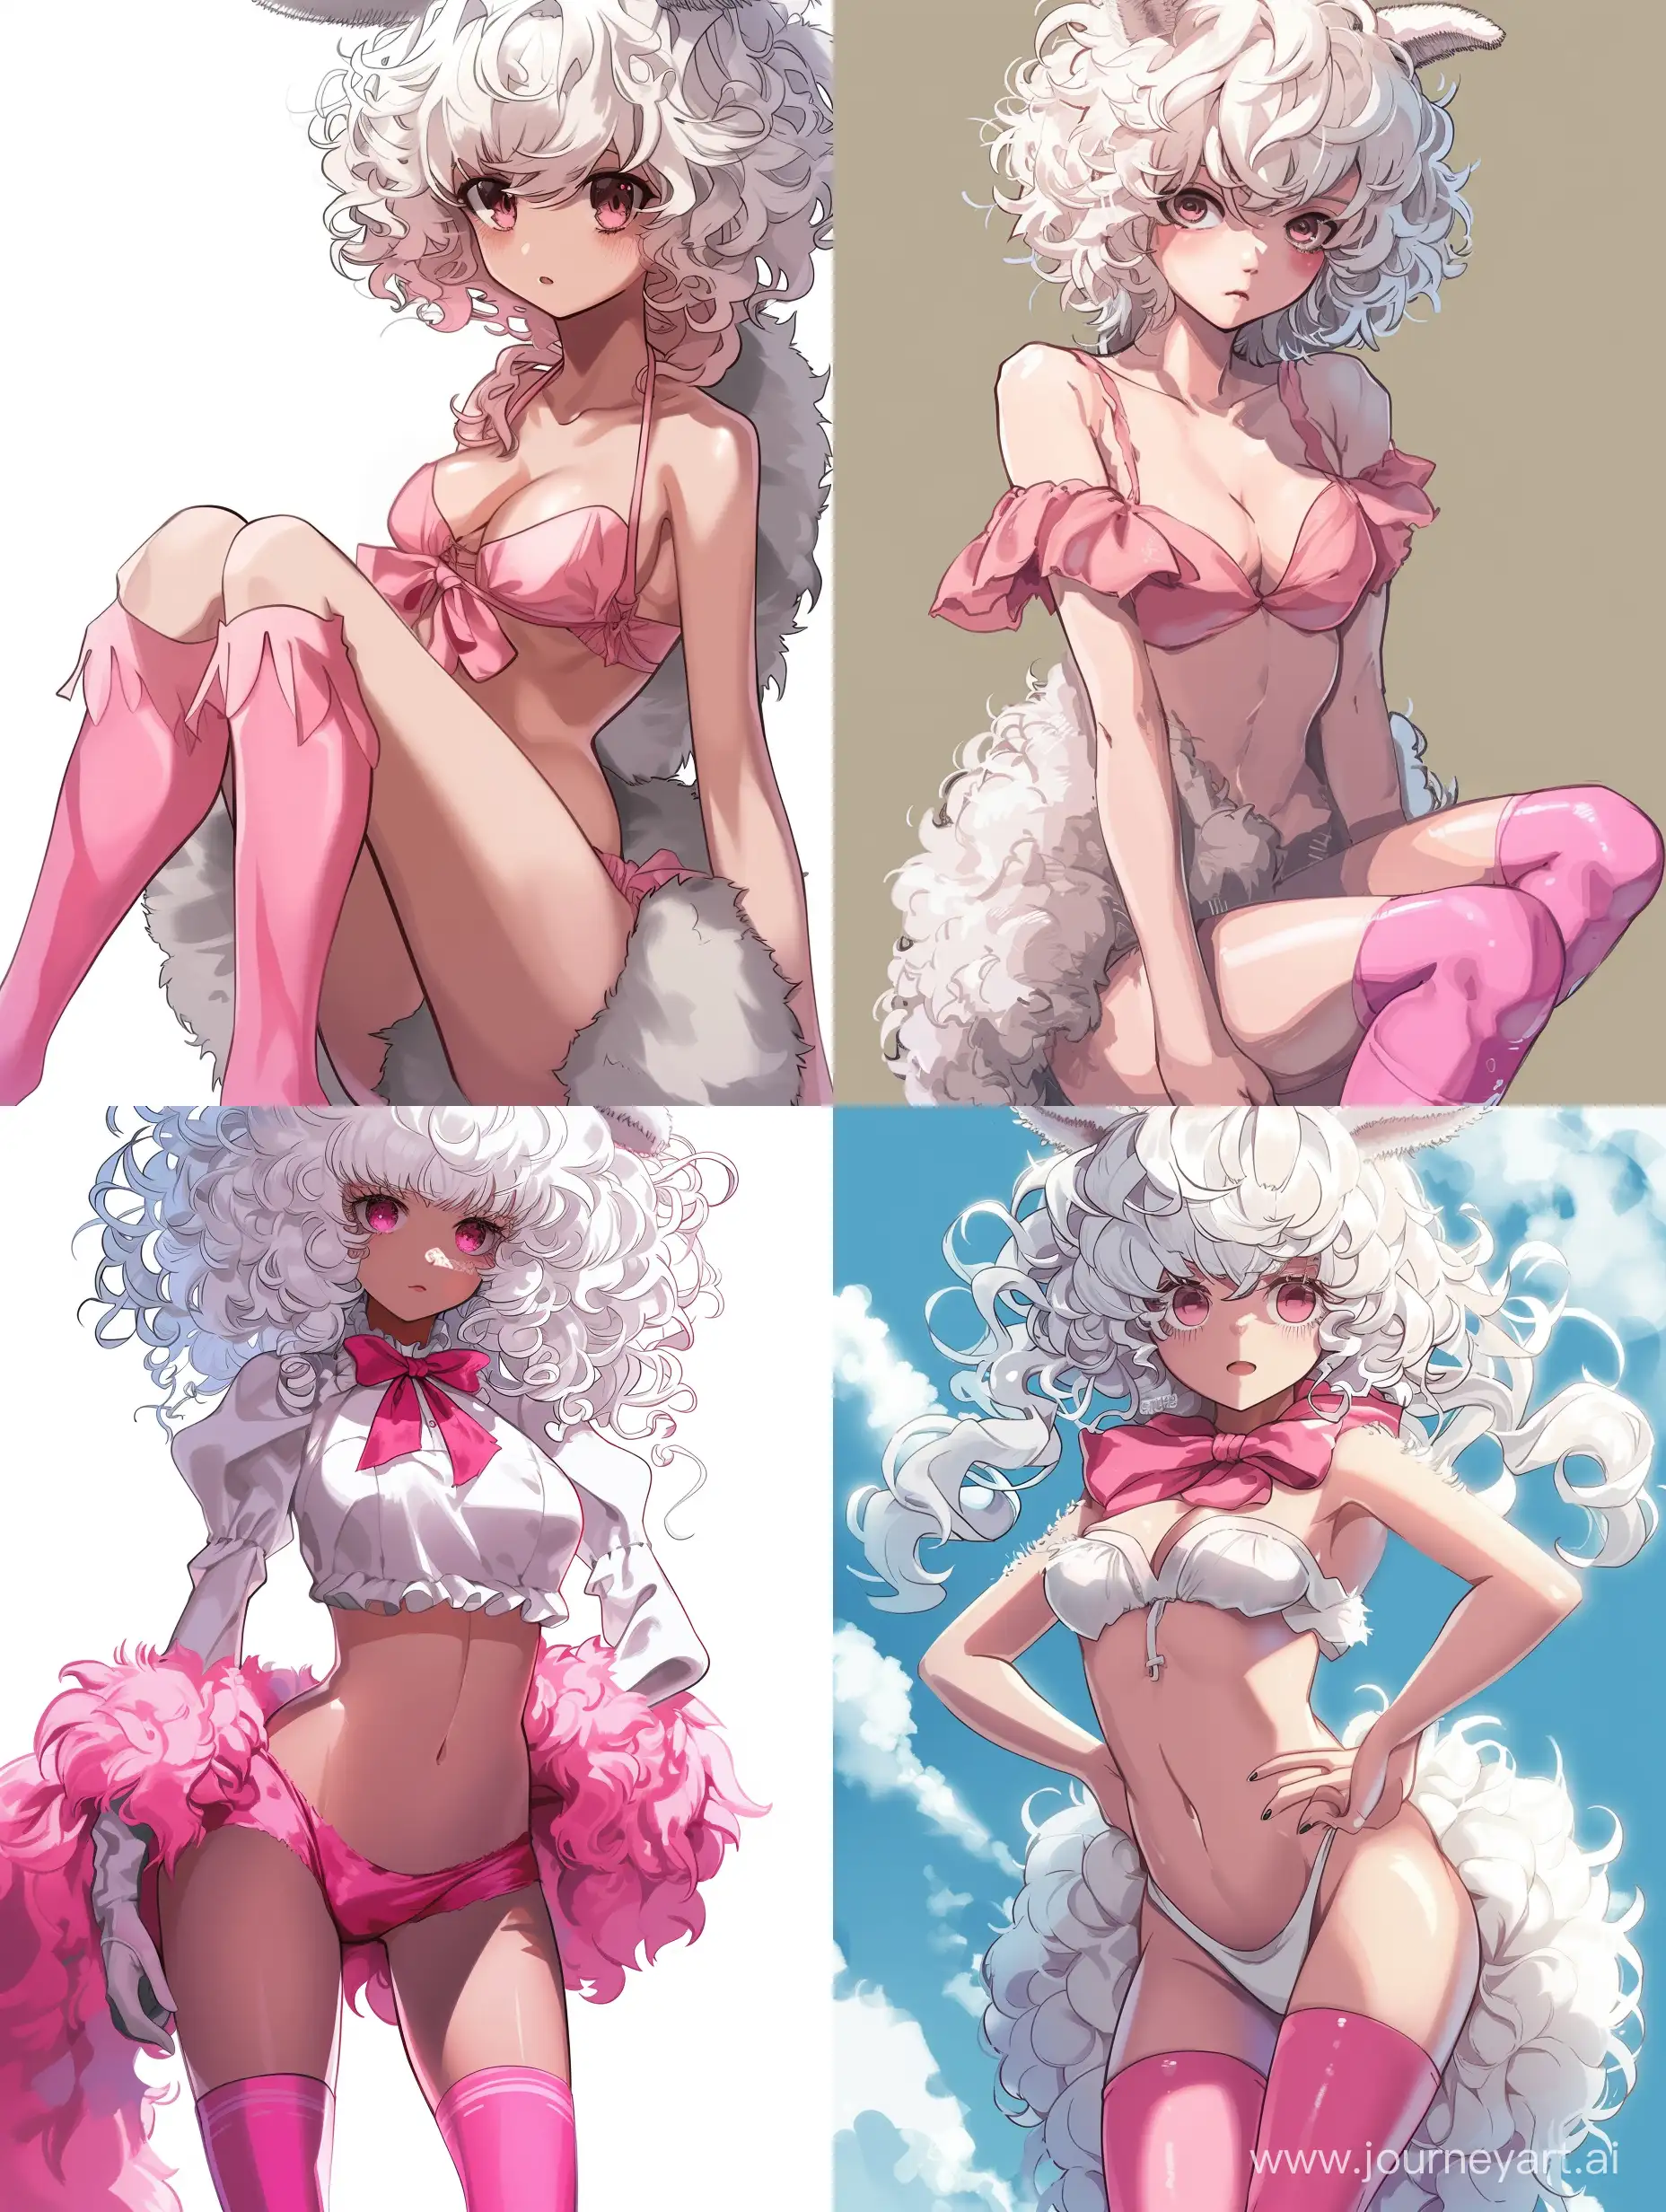 Charming-Anime-Alpaca-Girl-with-White-Curly-Hair-and-Pink-Stockings